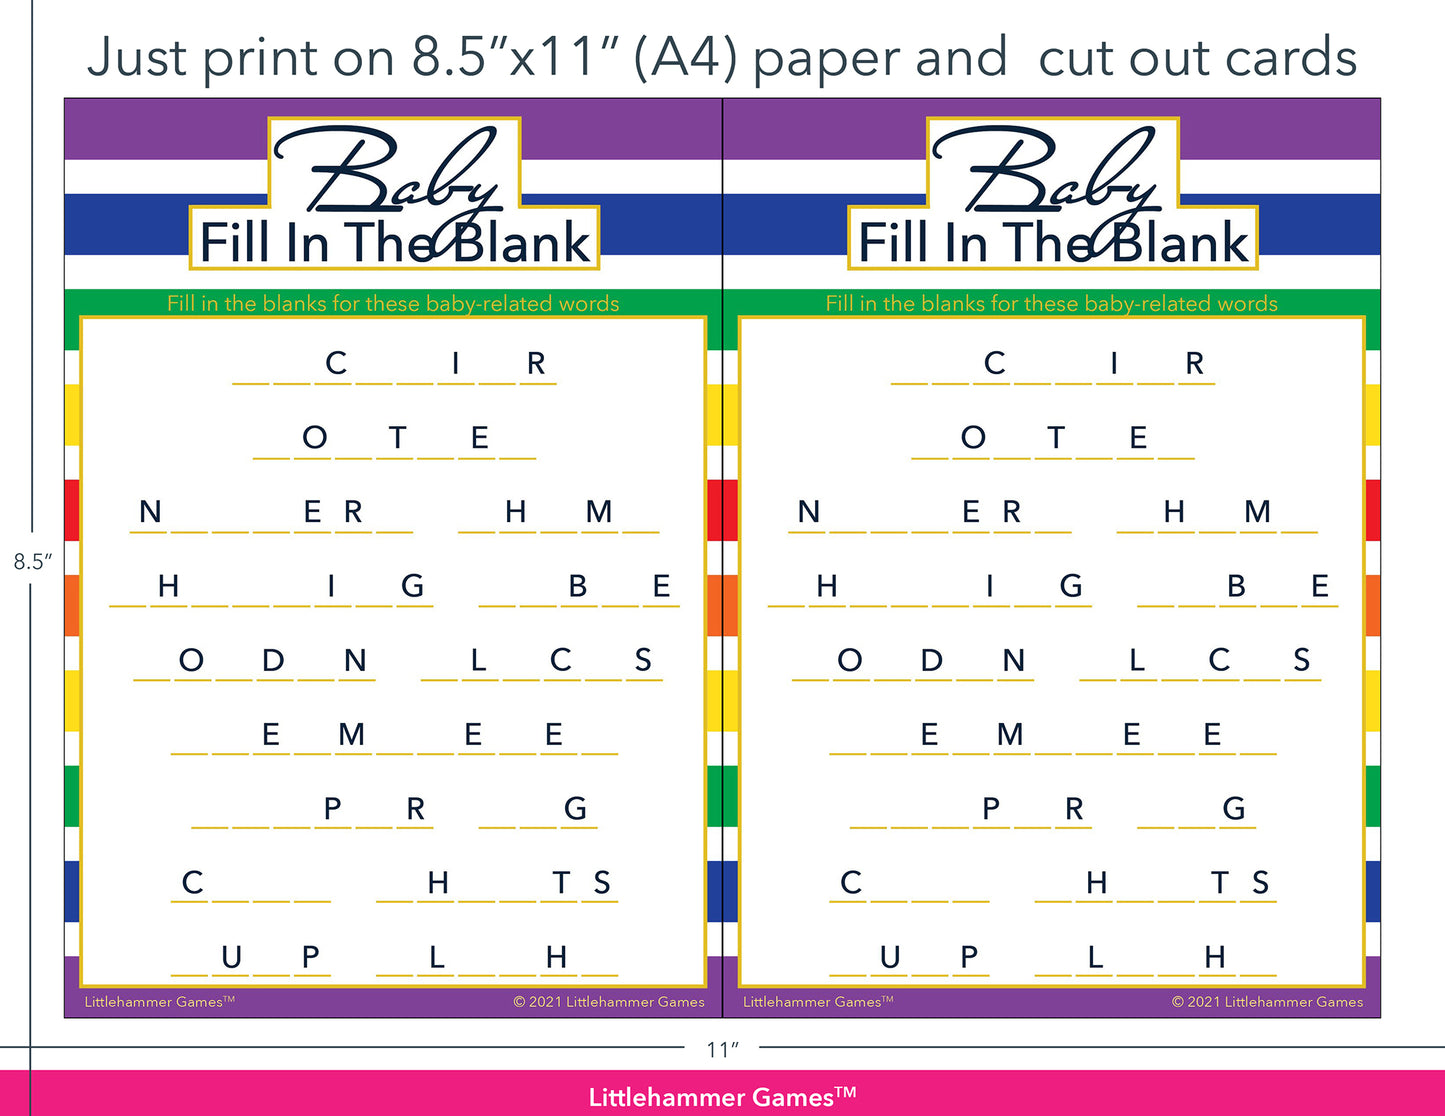 Baby Fill in the Blank rainbow-striped game cards with printing instructions